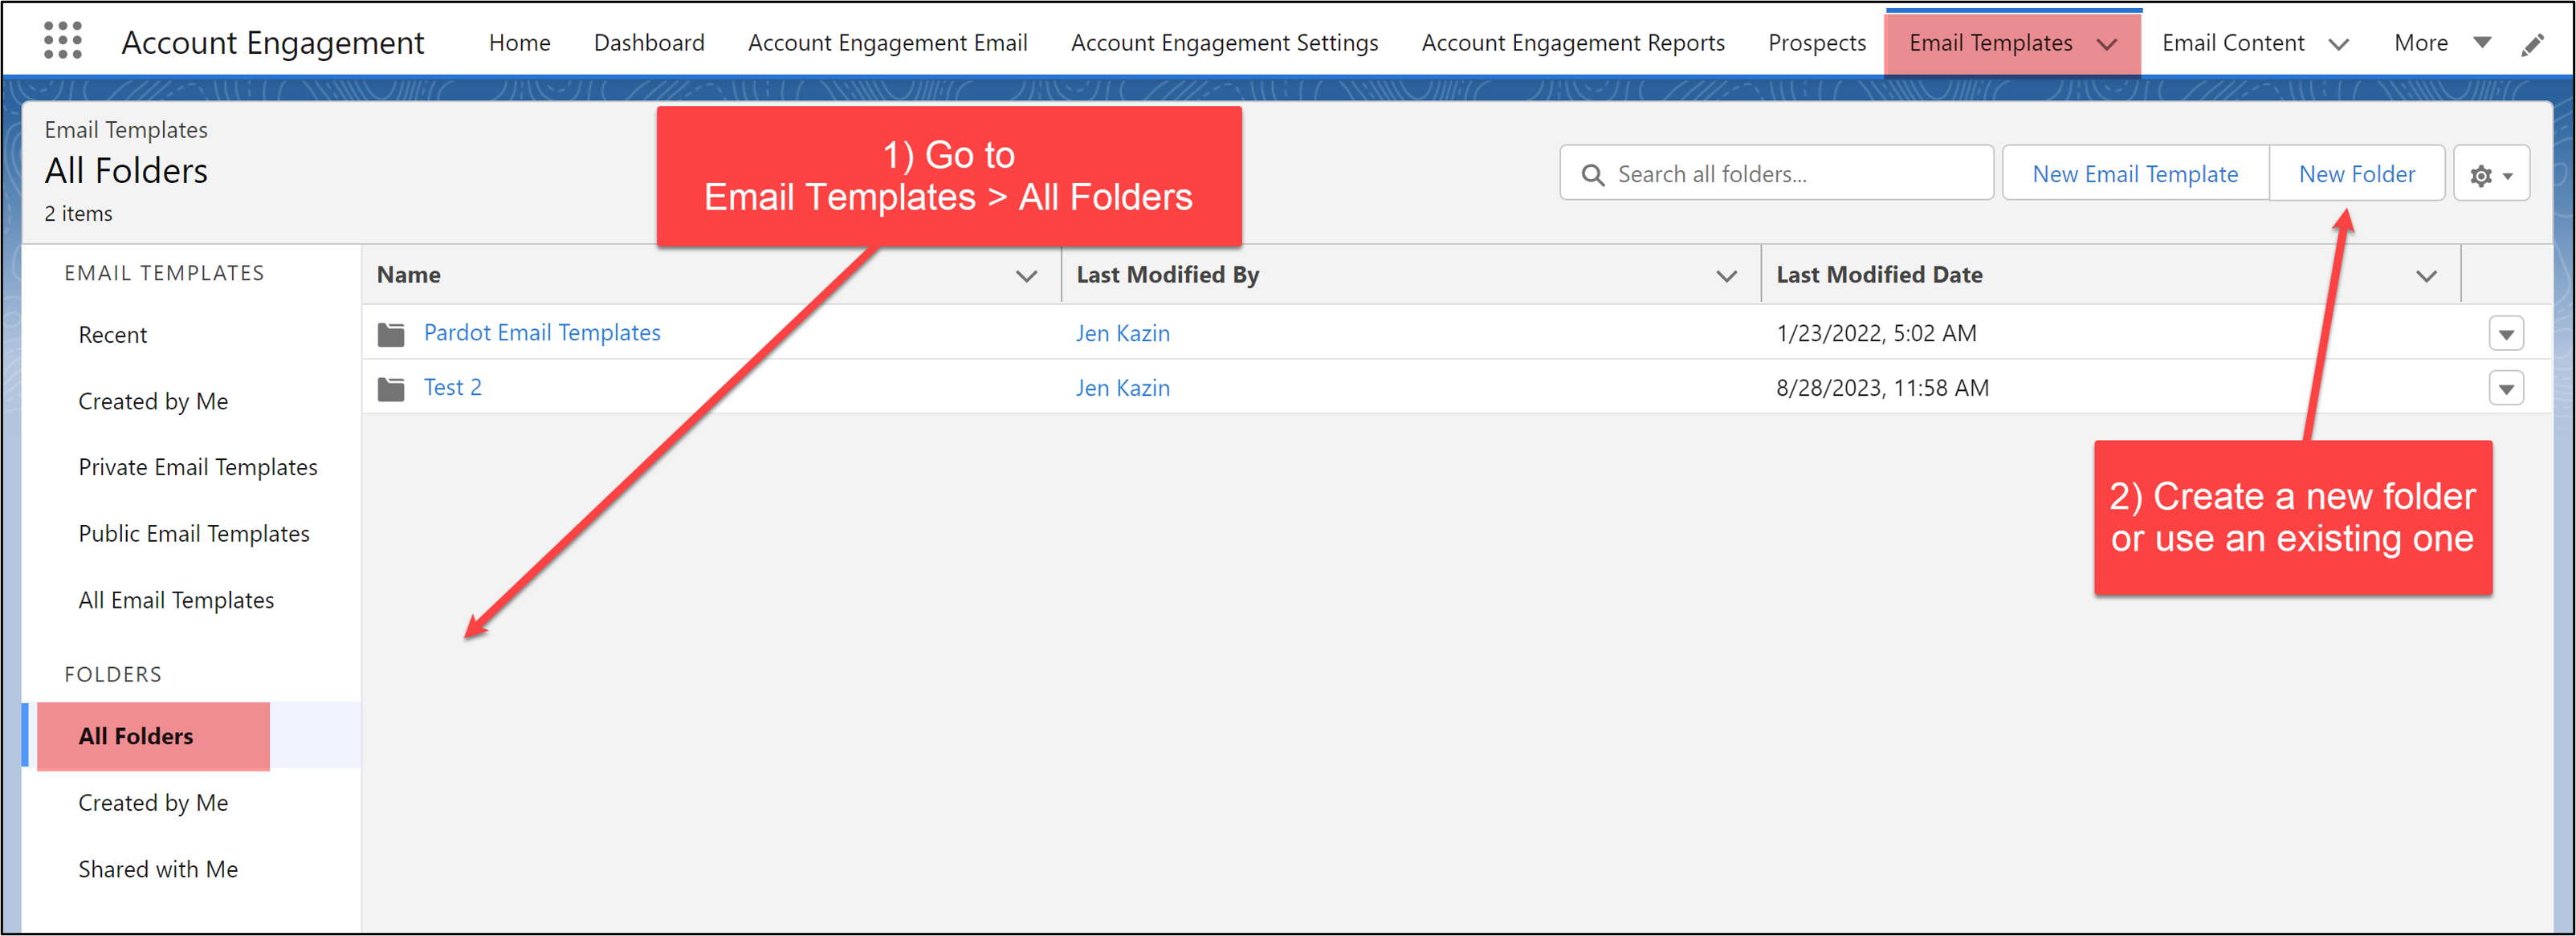 Account Engagement Email Template Share Folder